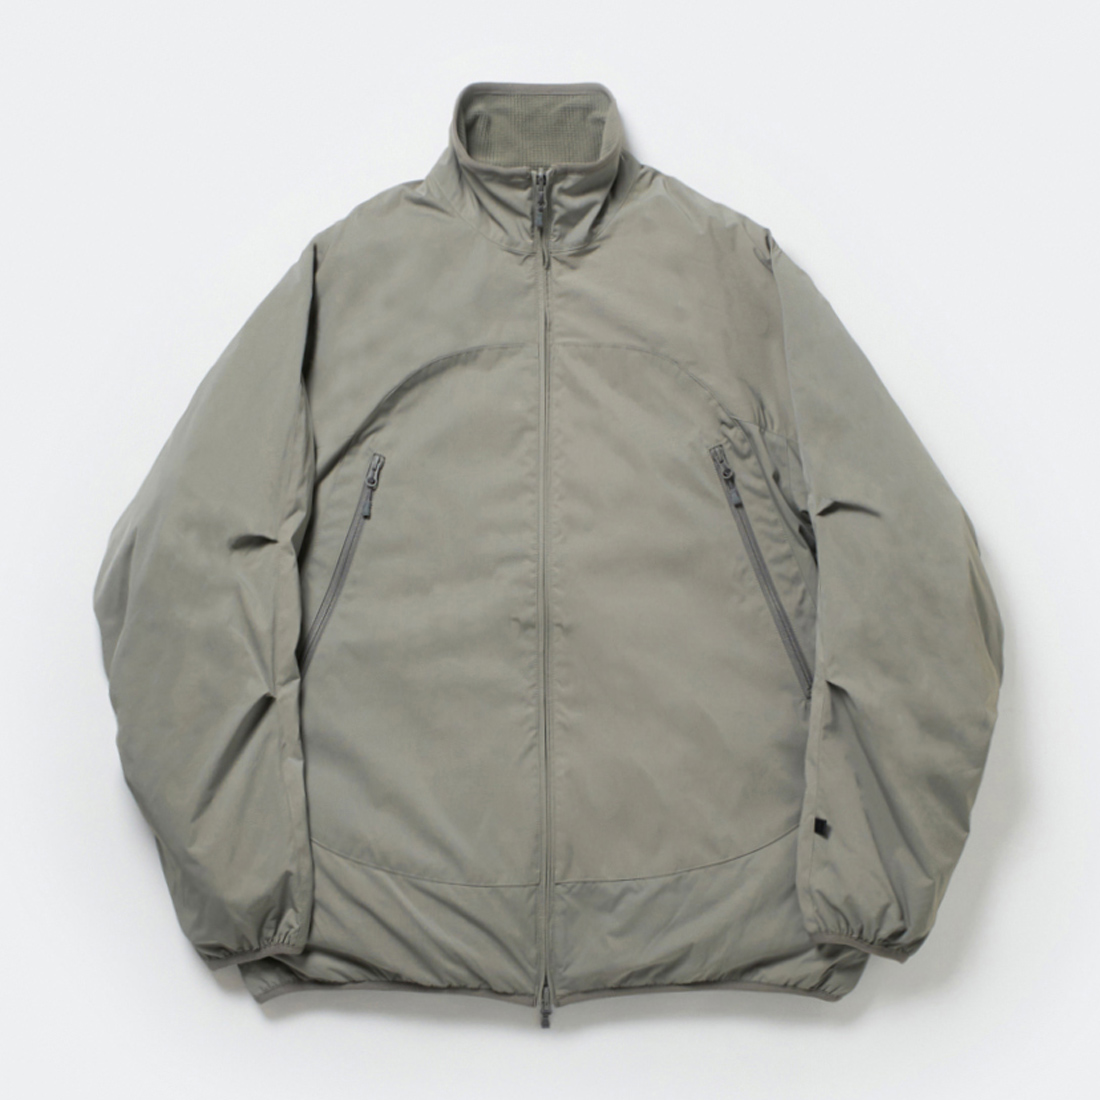 TECH REVERSIBLE MIL ECWCS STAND JACKET - Wolf Gray